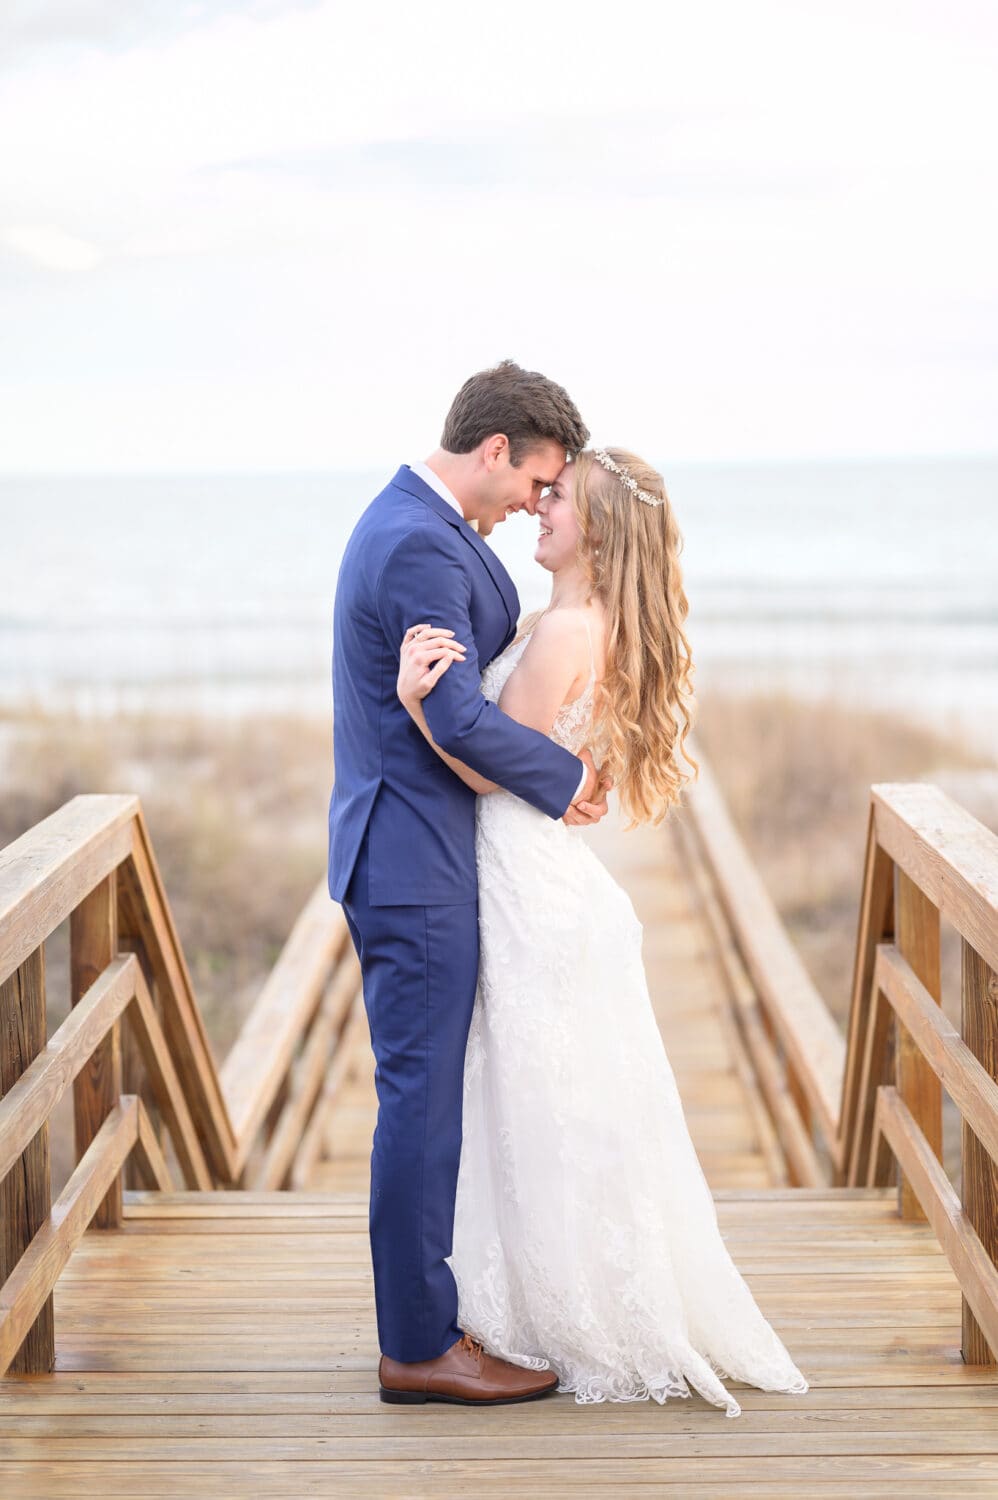 Touching noses on the boardwalk - Pawleys Island